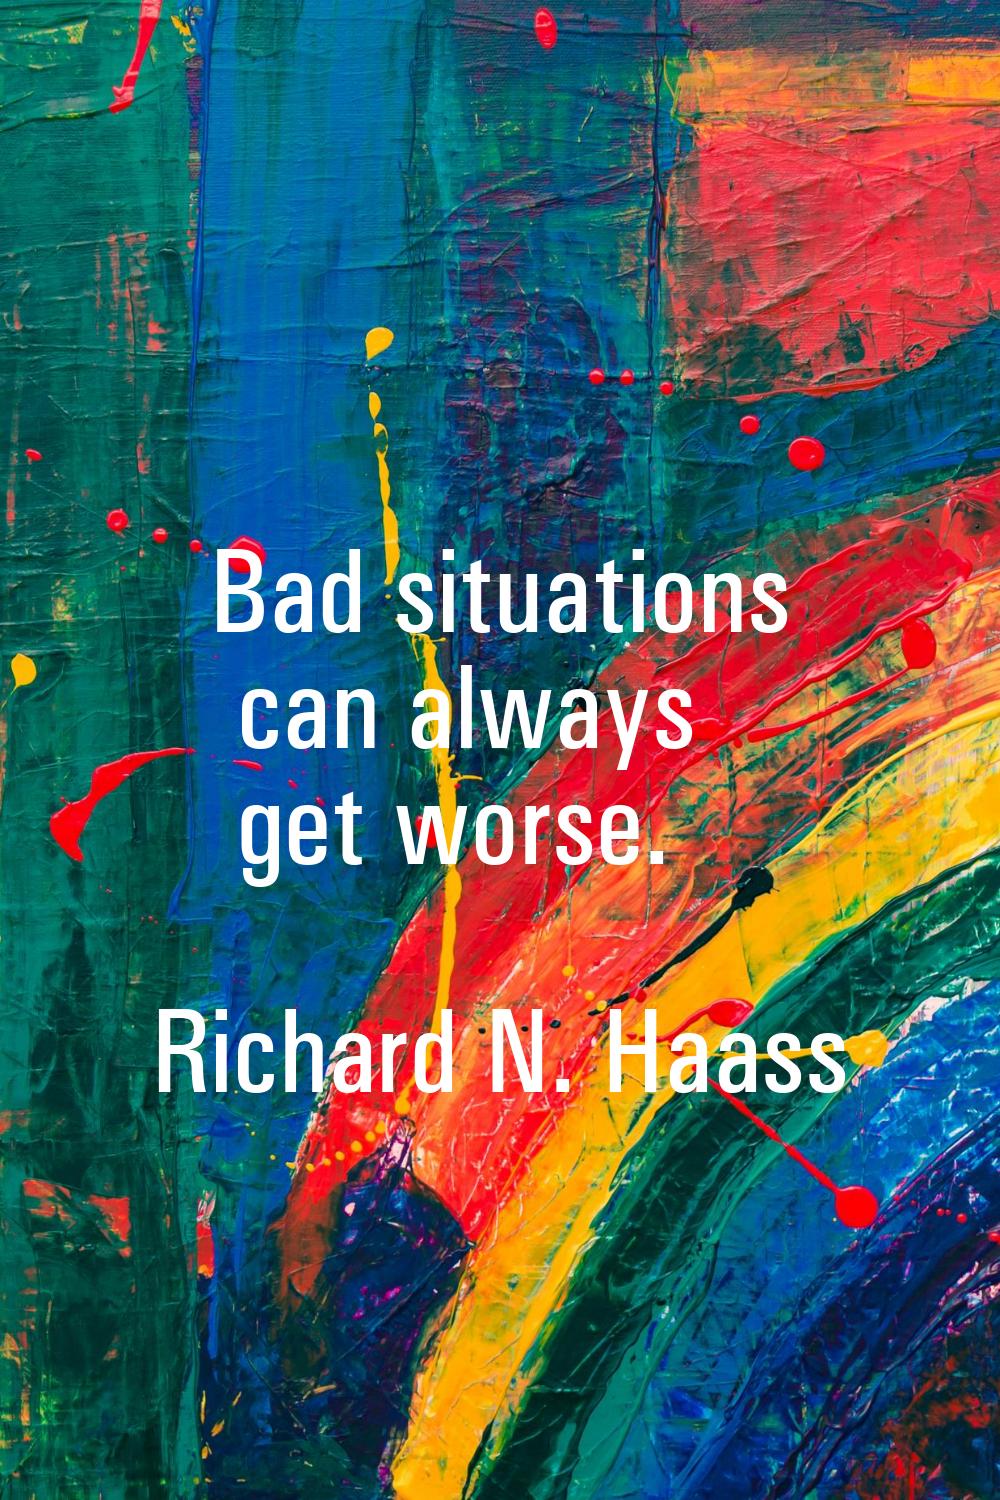 Bad situations can always get worse.